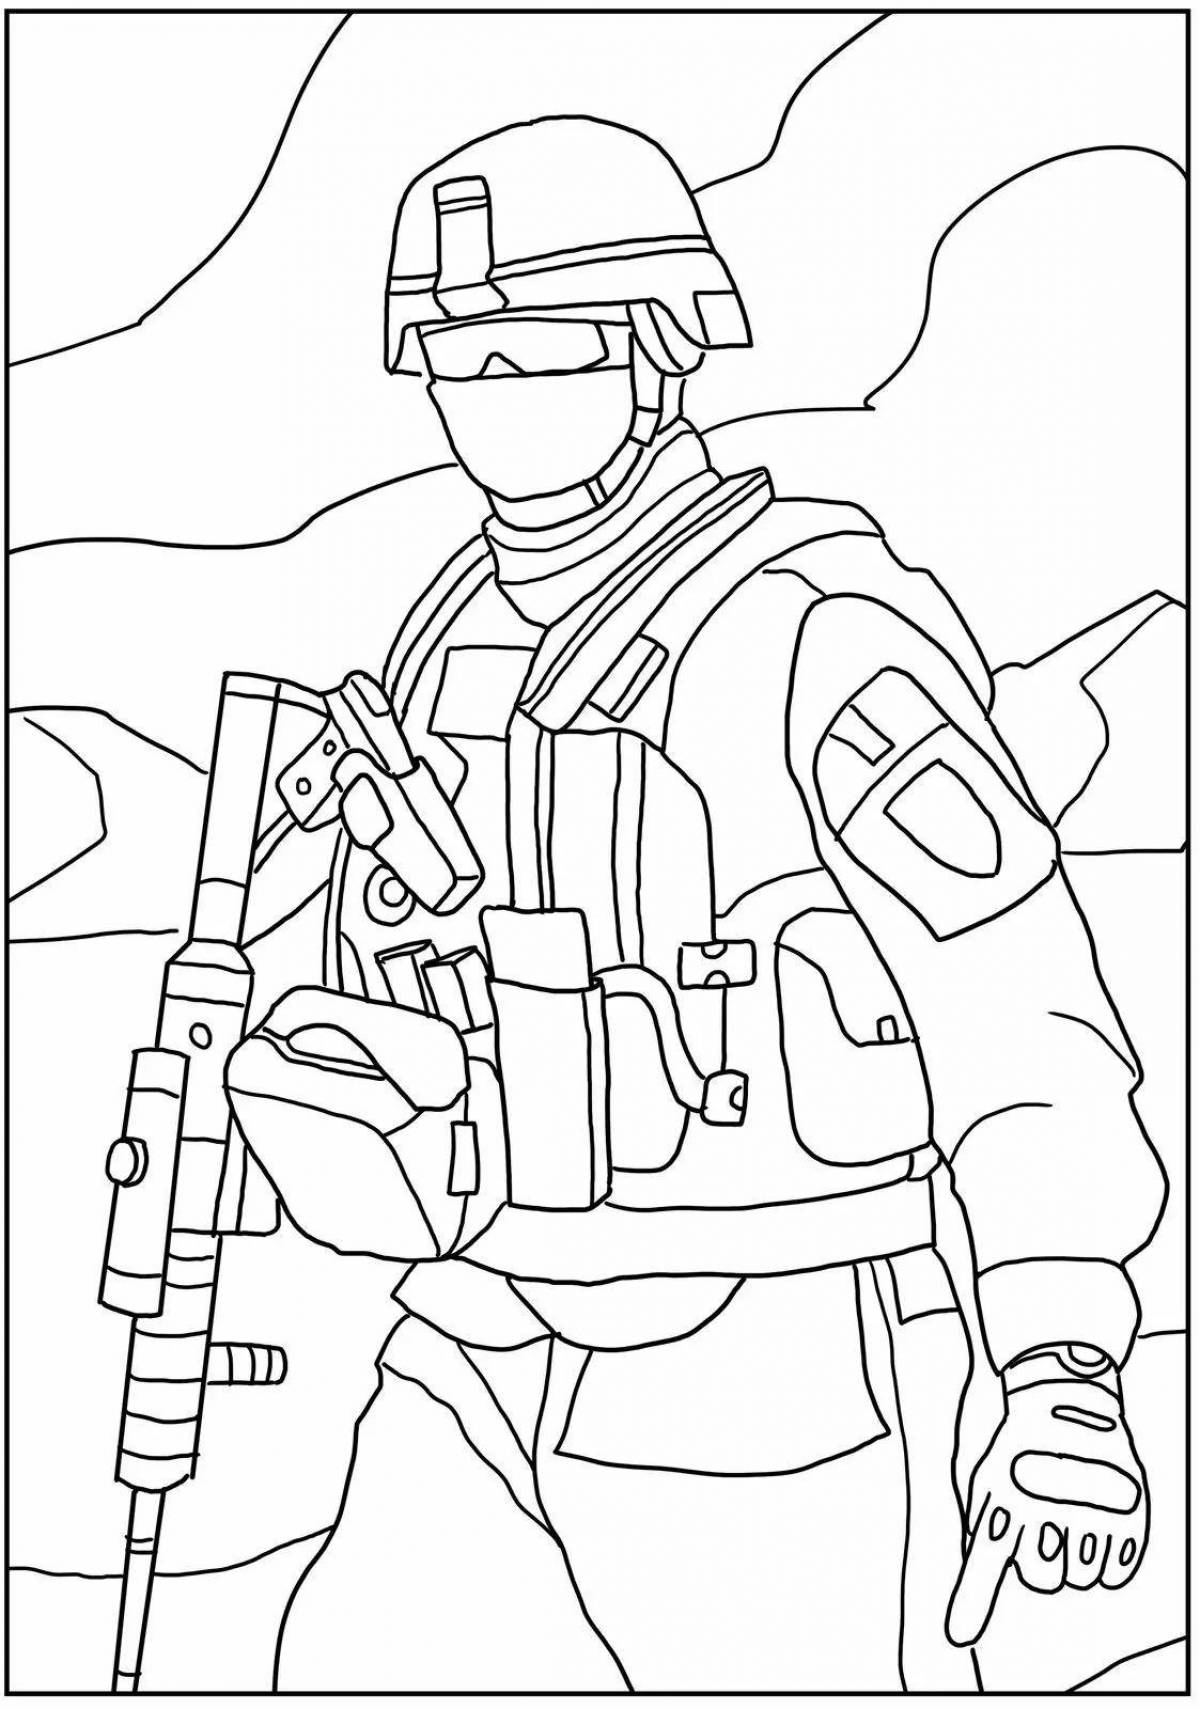 Glowing army special forces coloring page